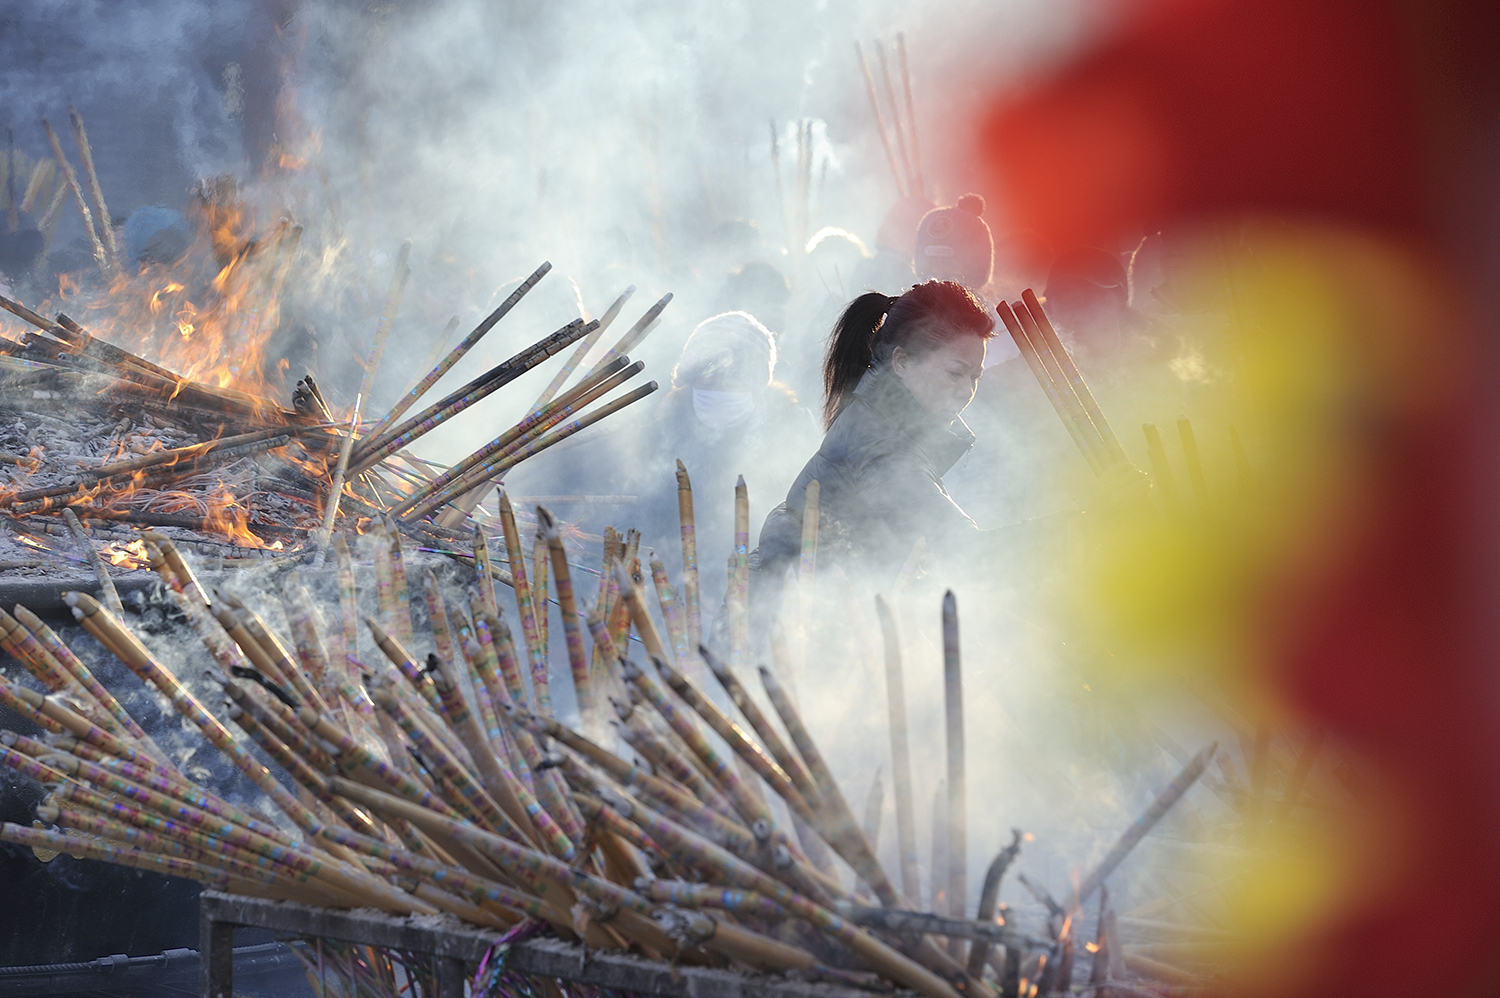 source: Tao Zhang/NurPhoto via Getty Images | Chinese worshippers light incense as they pray at the Dacheng Temple on Jan 28, 2017 in Qiqihar, China.